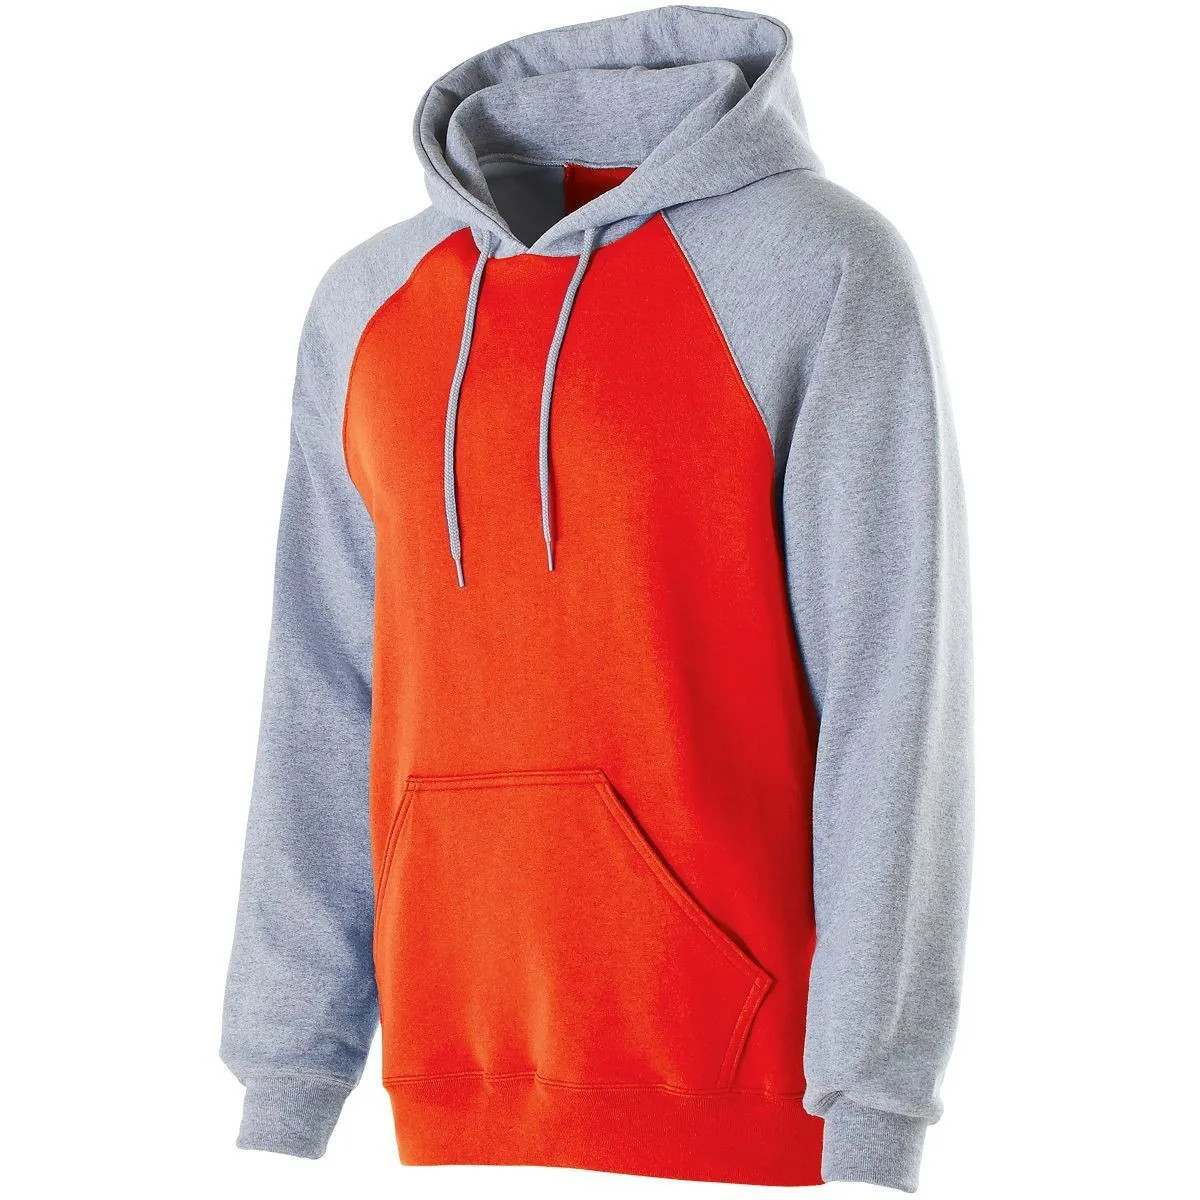 Thick High Quality Hoodies Best Sale, UP TO 54% OFF | www.rupit.com